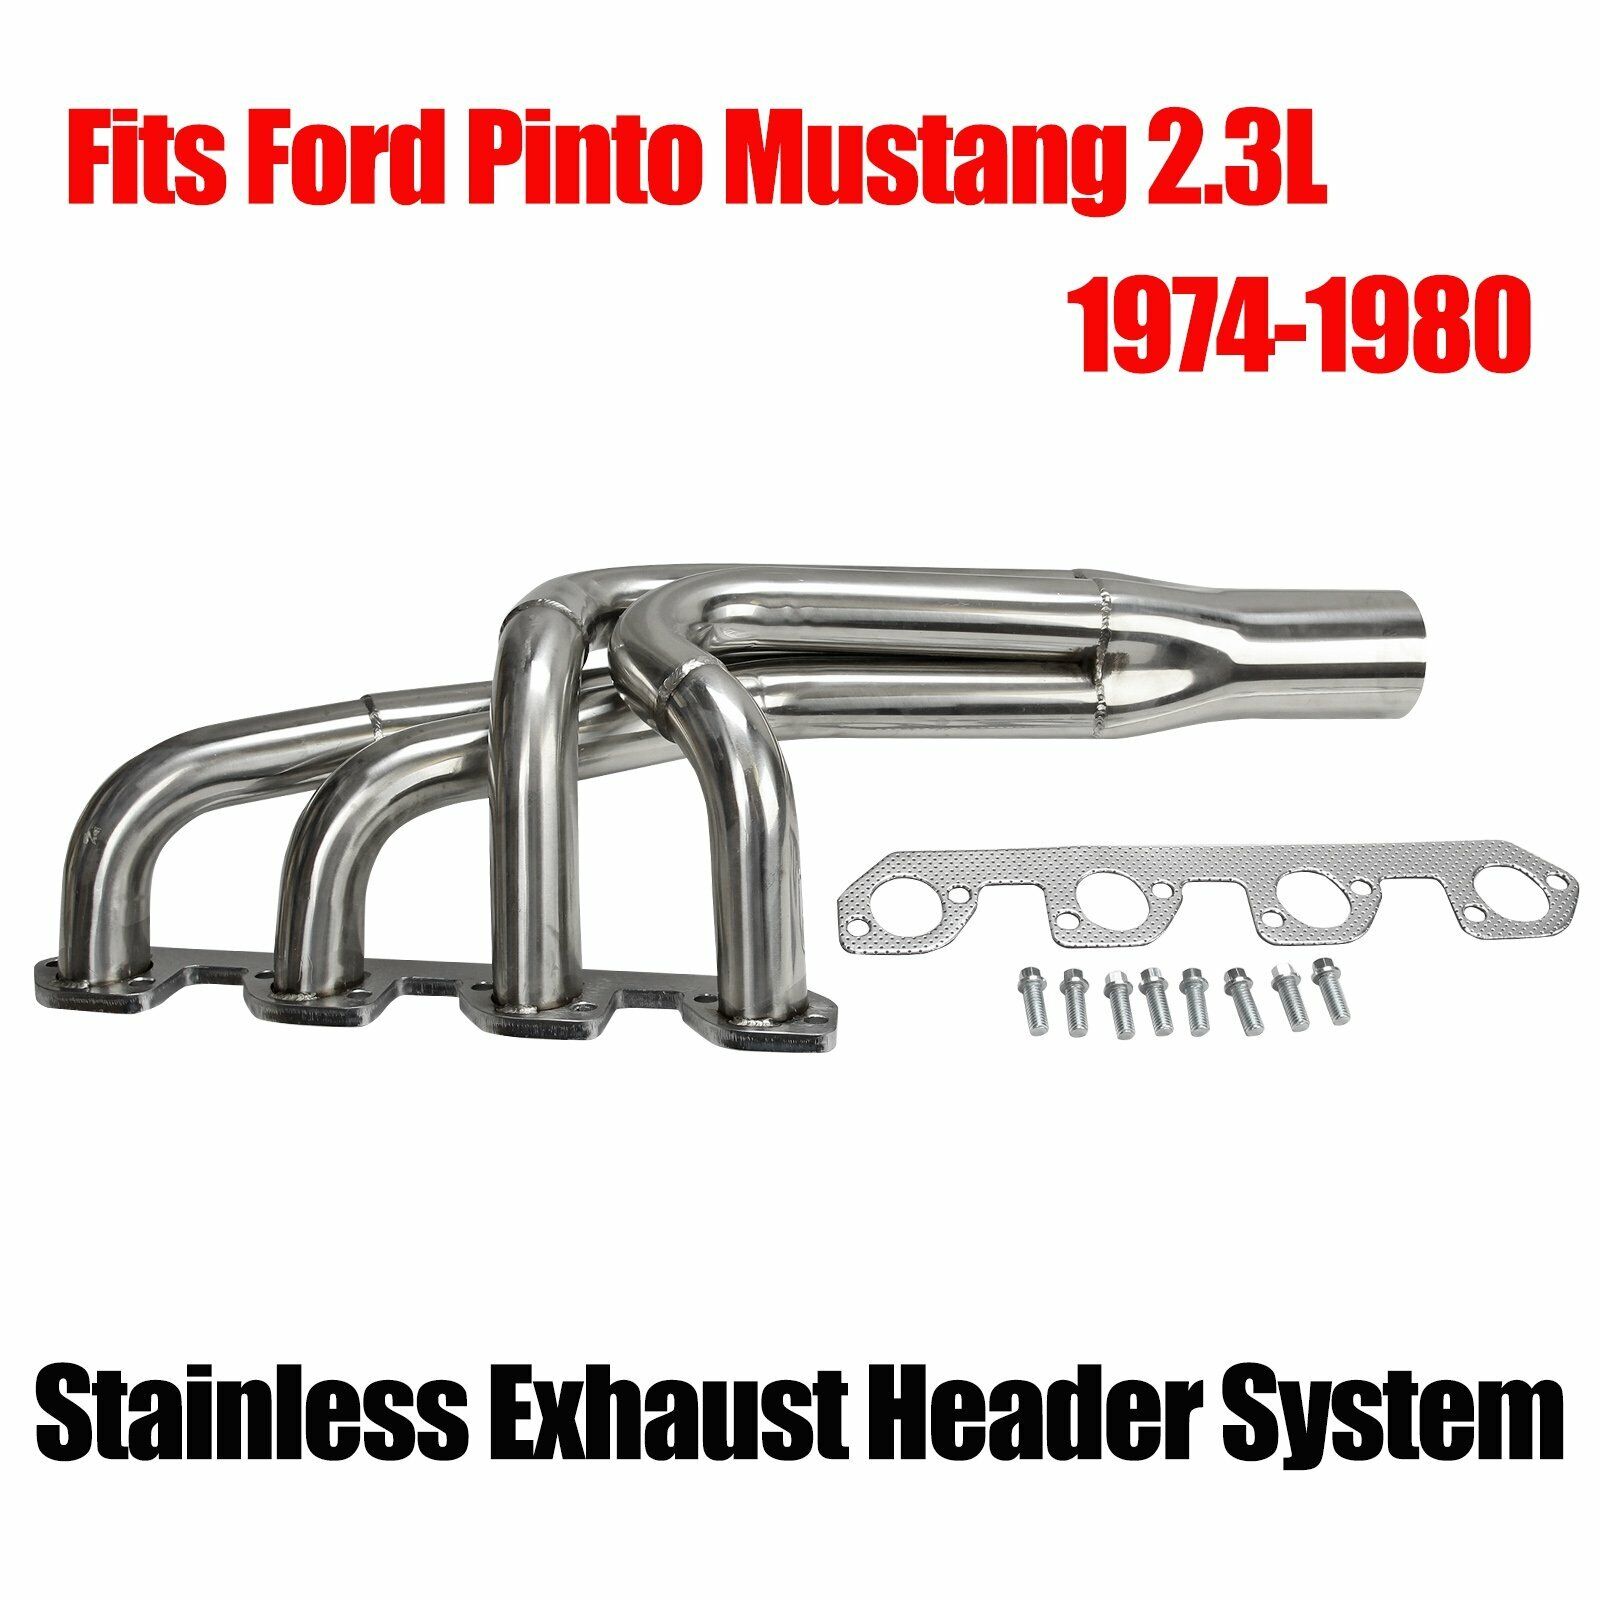 Fits Ford Pinto Mustang 2.3L Stainless Exhaust Header System Production Chassis